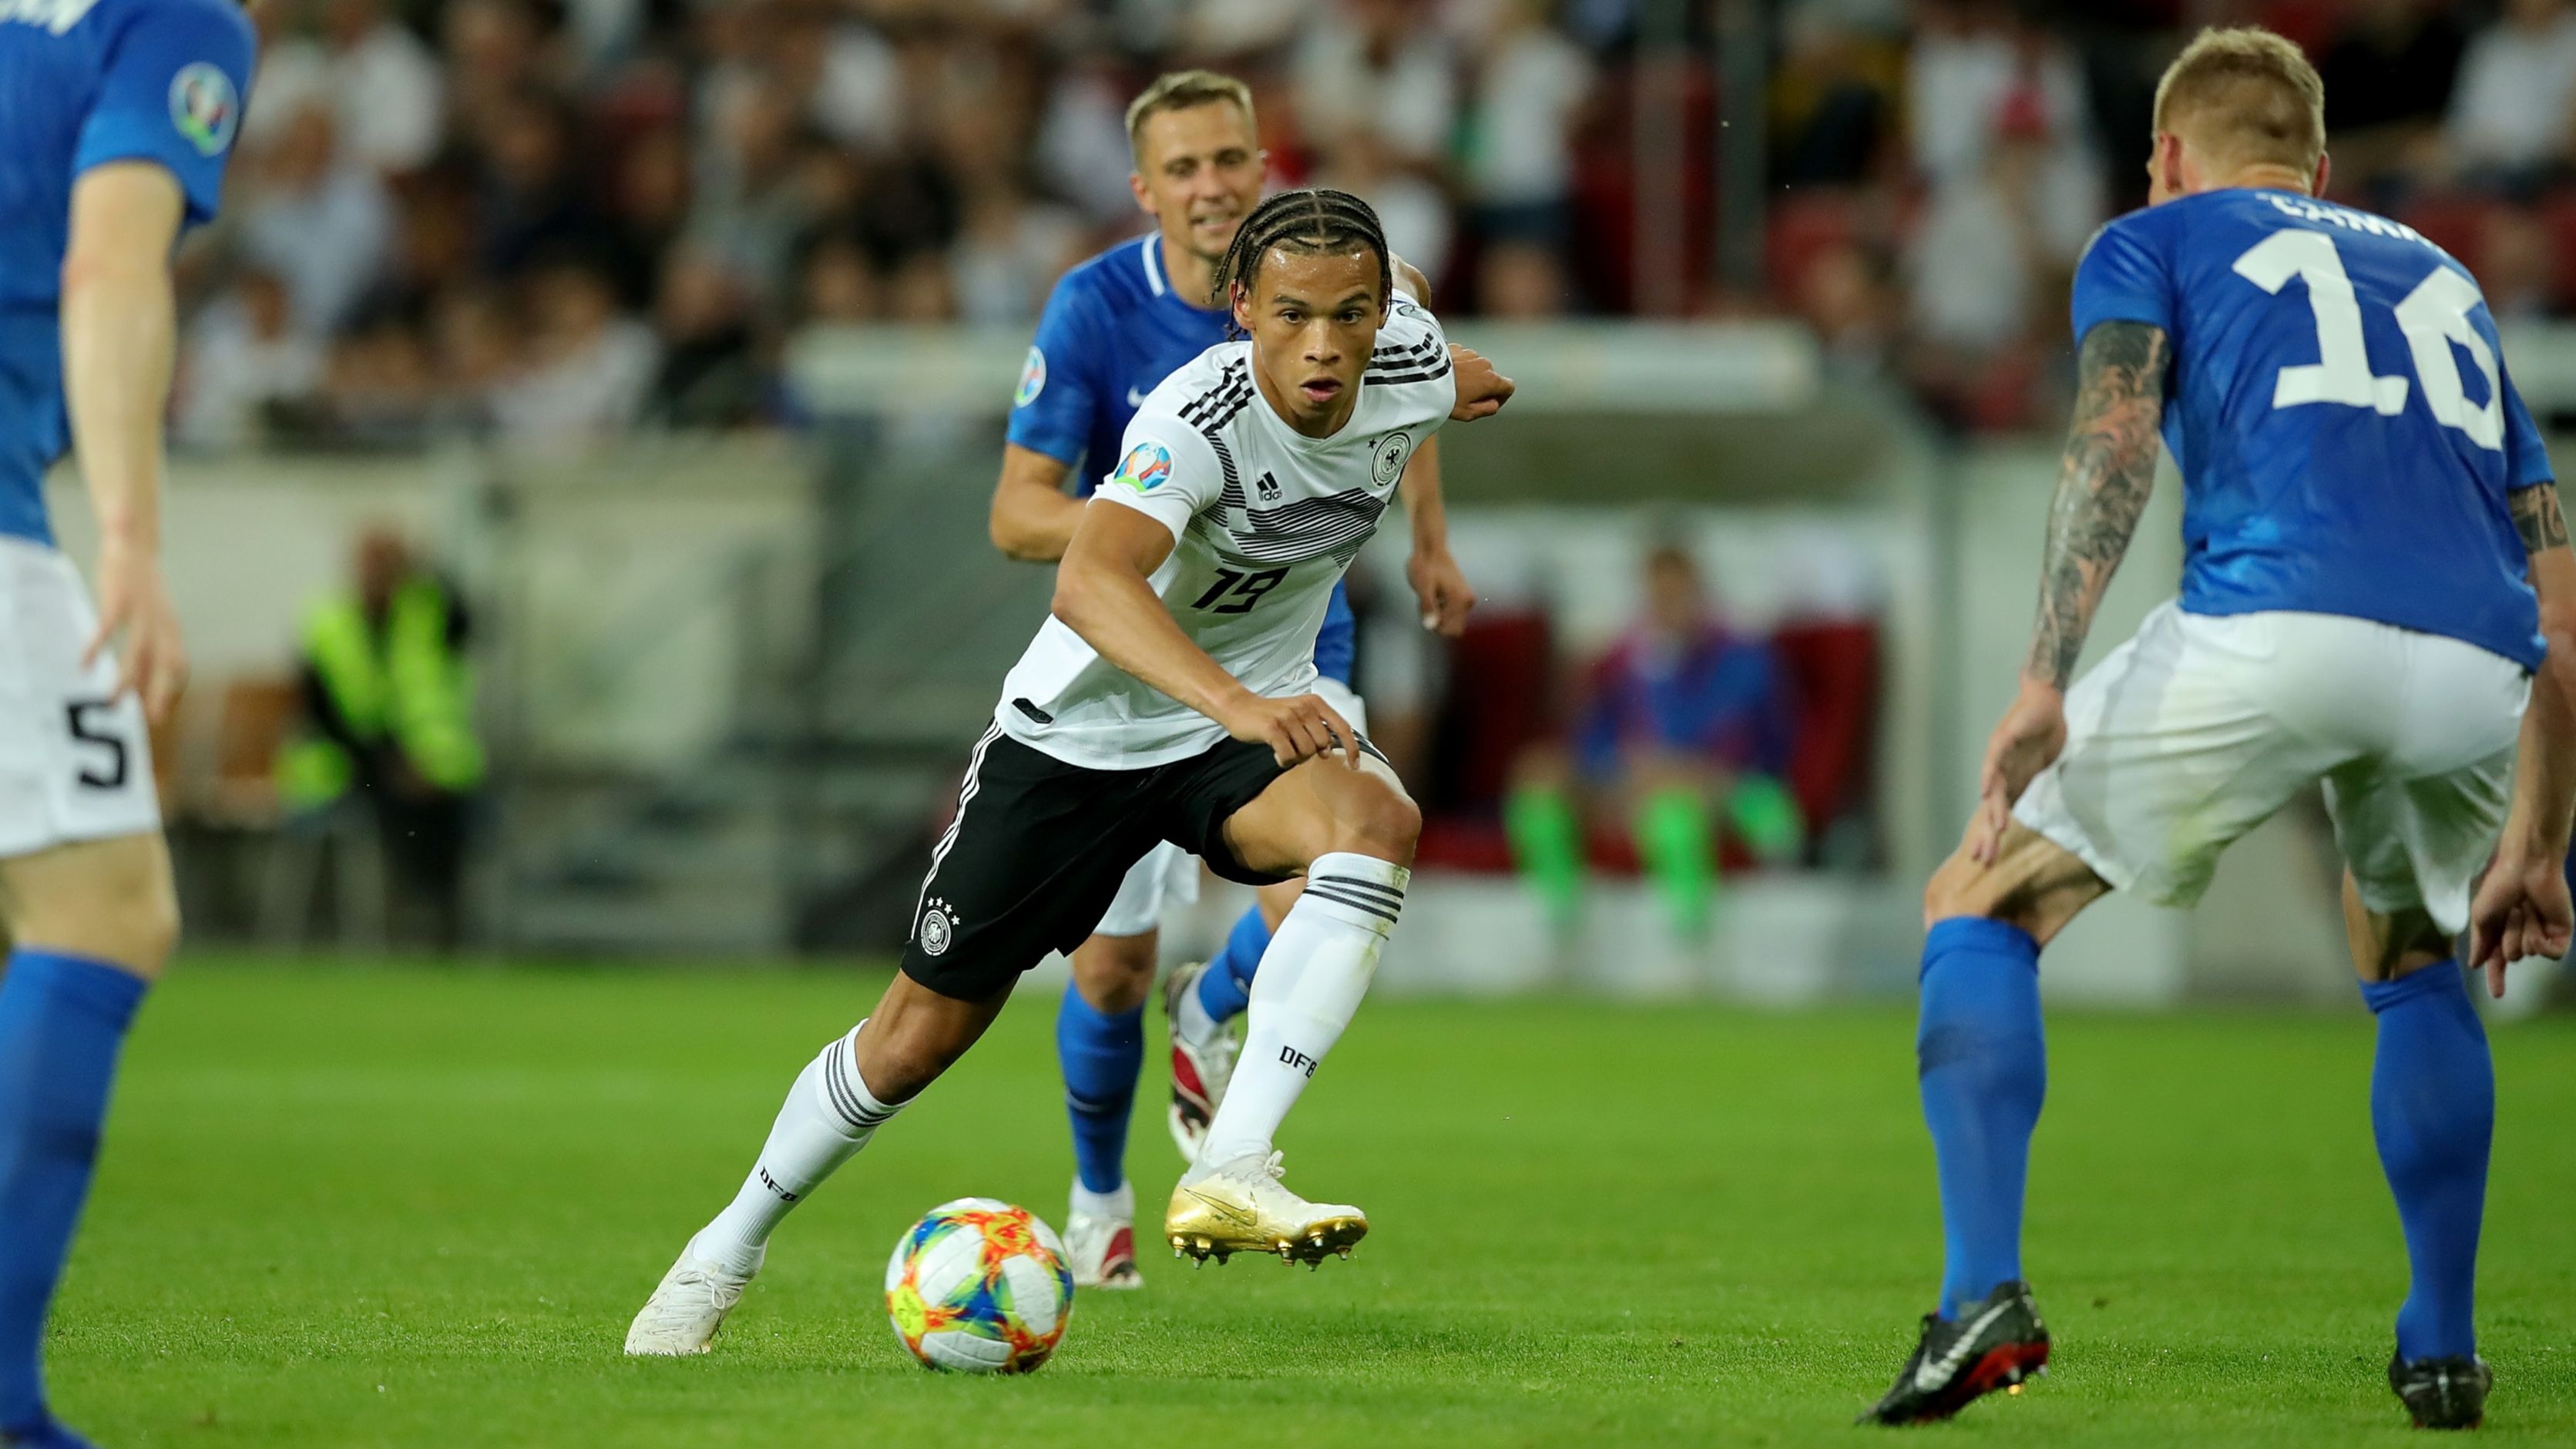 Leroy Sane made his debut for Germany in 2015